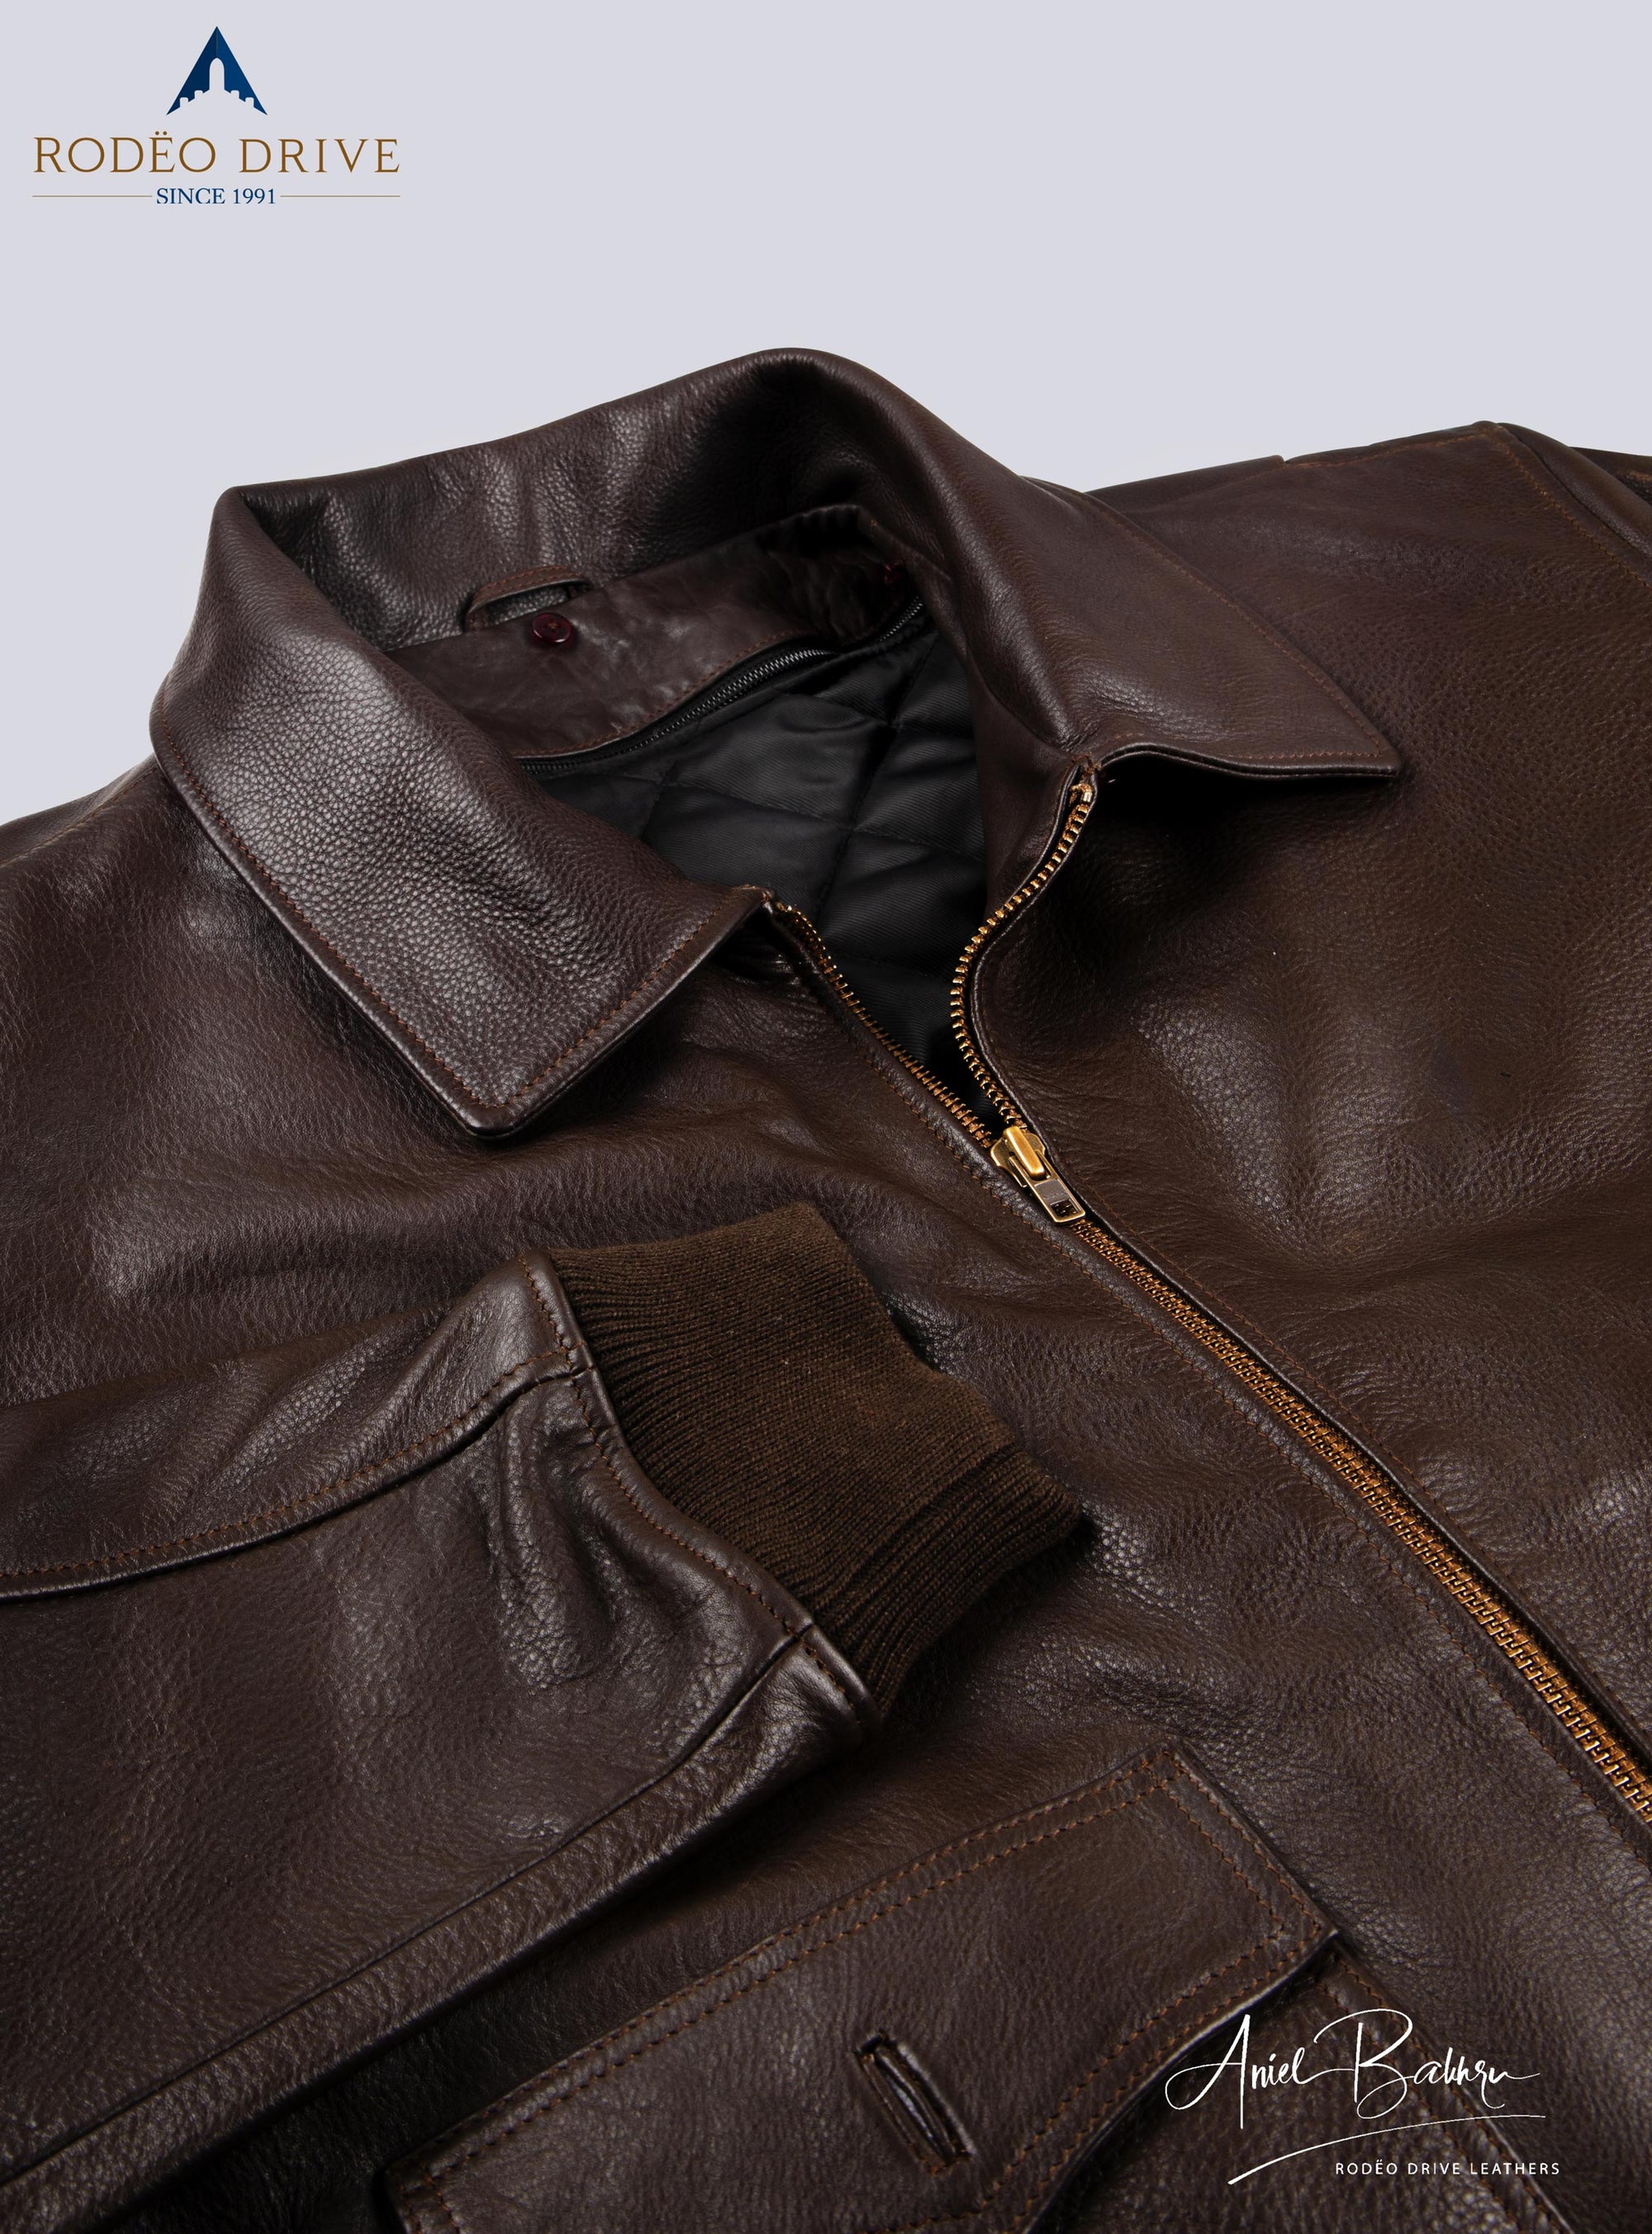 B2 bomber jacket with leather collar